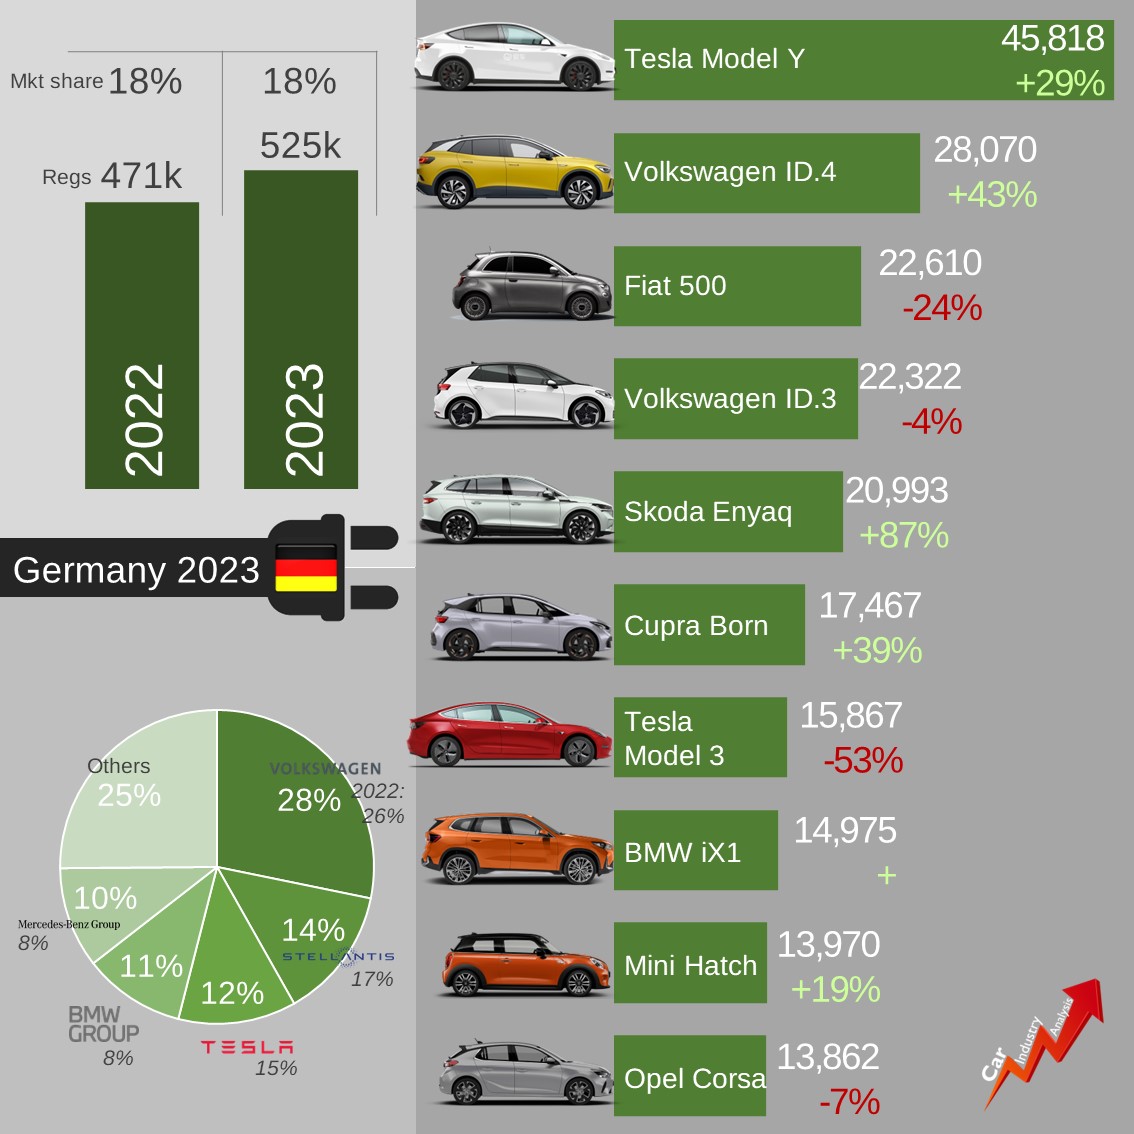 With 525k units registered, Germany was Europe's largest BEV market in 2023. Although volume up 11%, it wasn't enough to gain mkt share. Shocking but not astonishing, #TeslaModelY was ahead of #VWID4. However, if you sum up volume from its twin #SkodaEnyaq, there's a winner